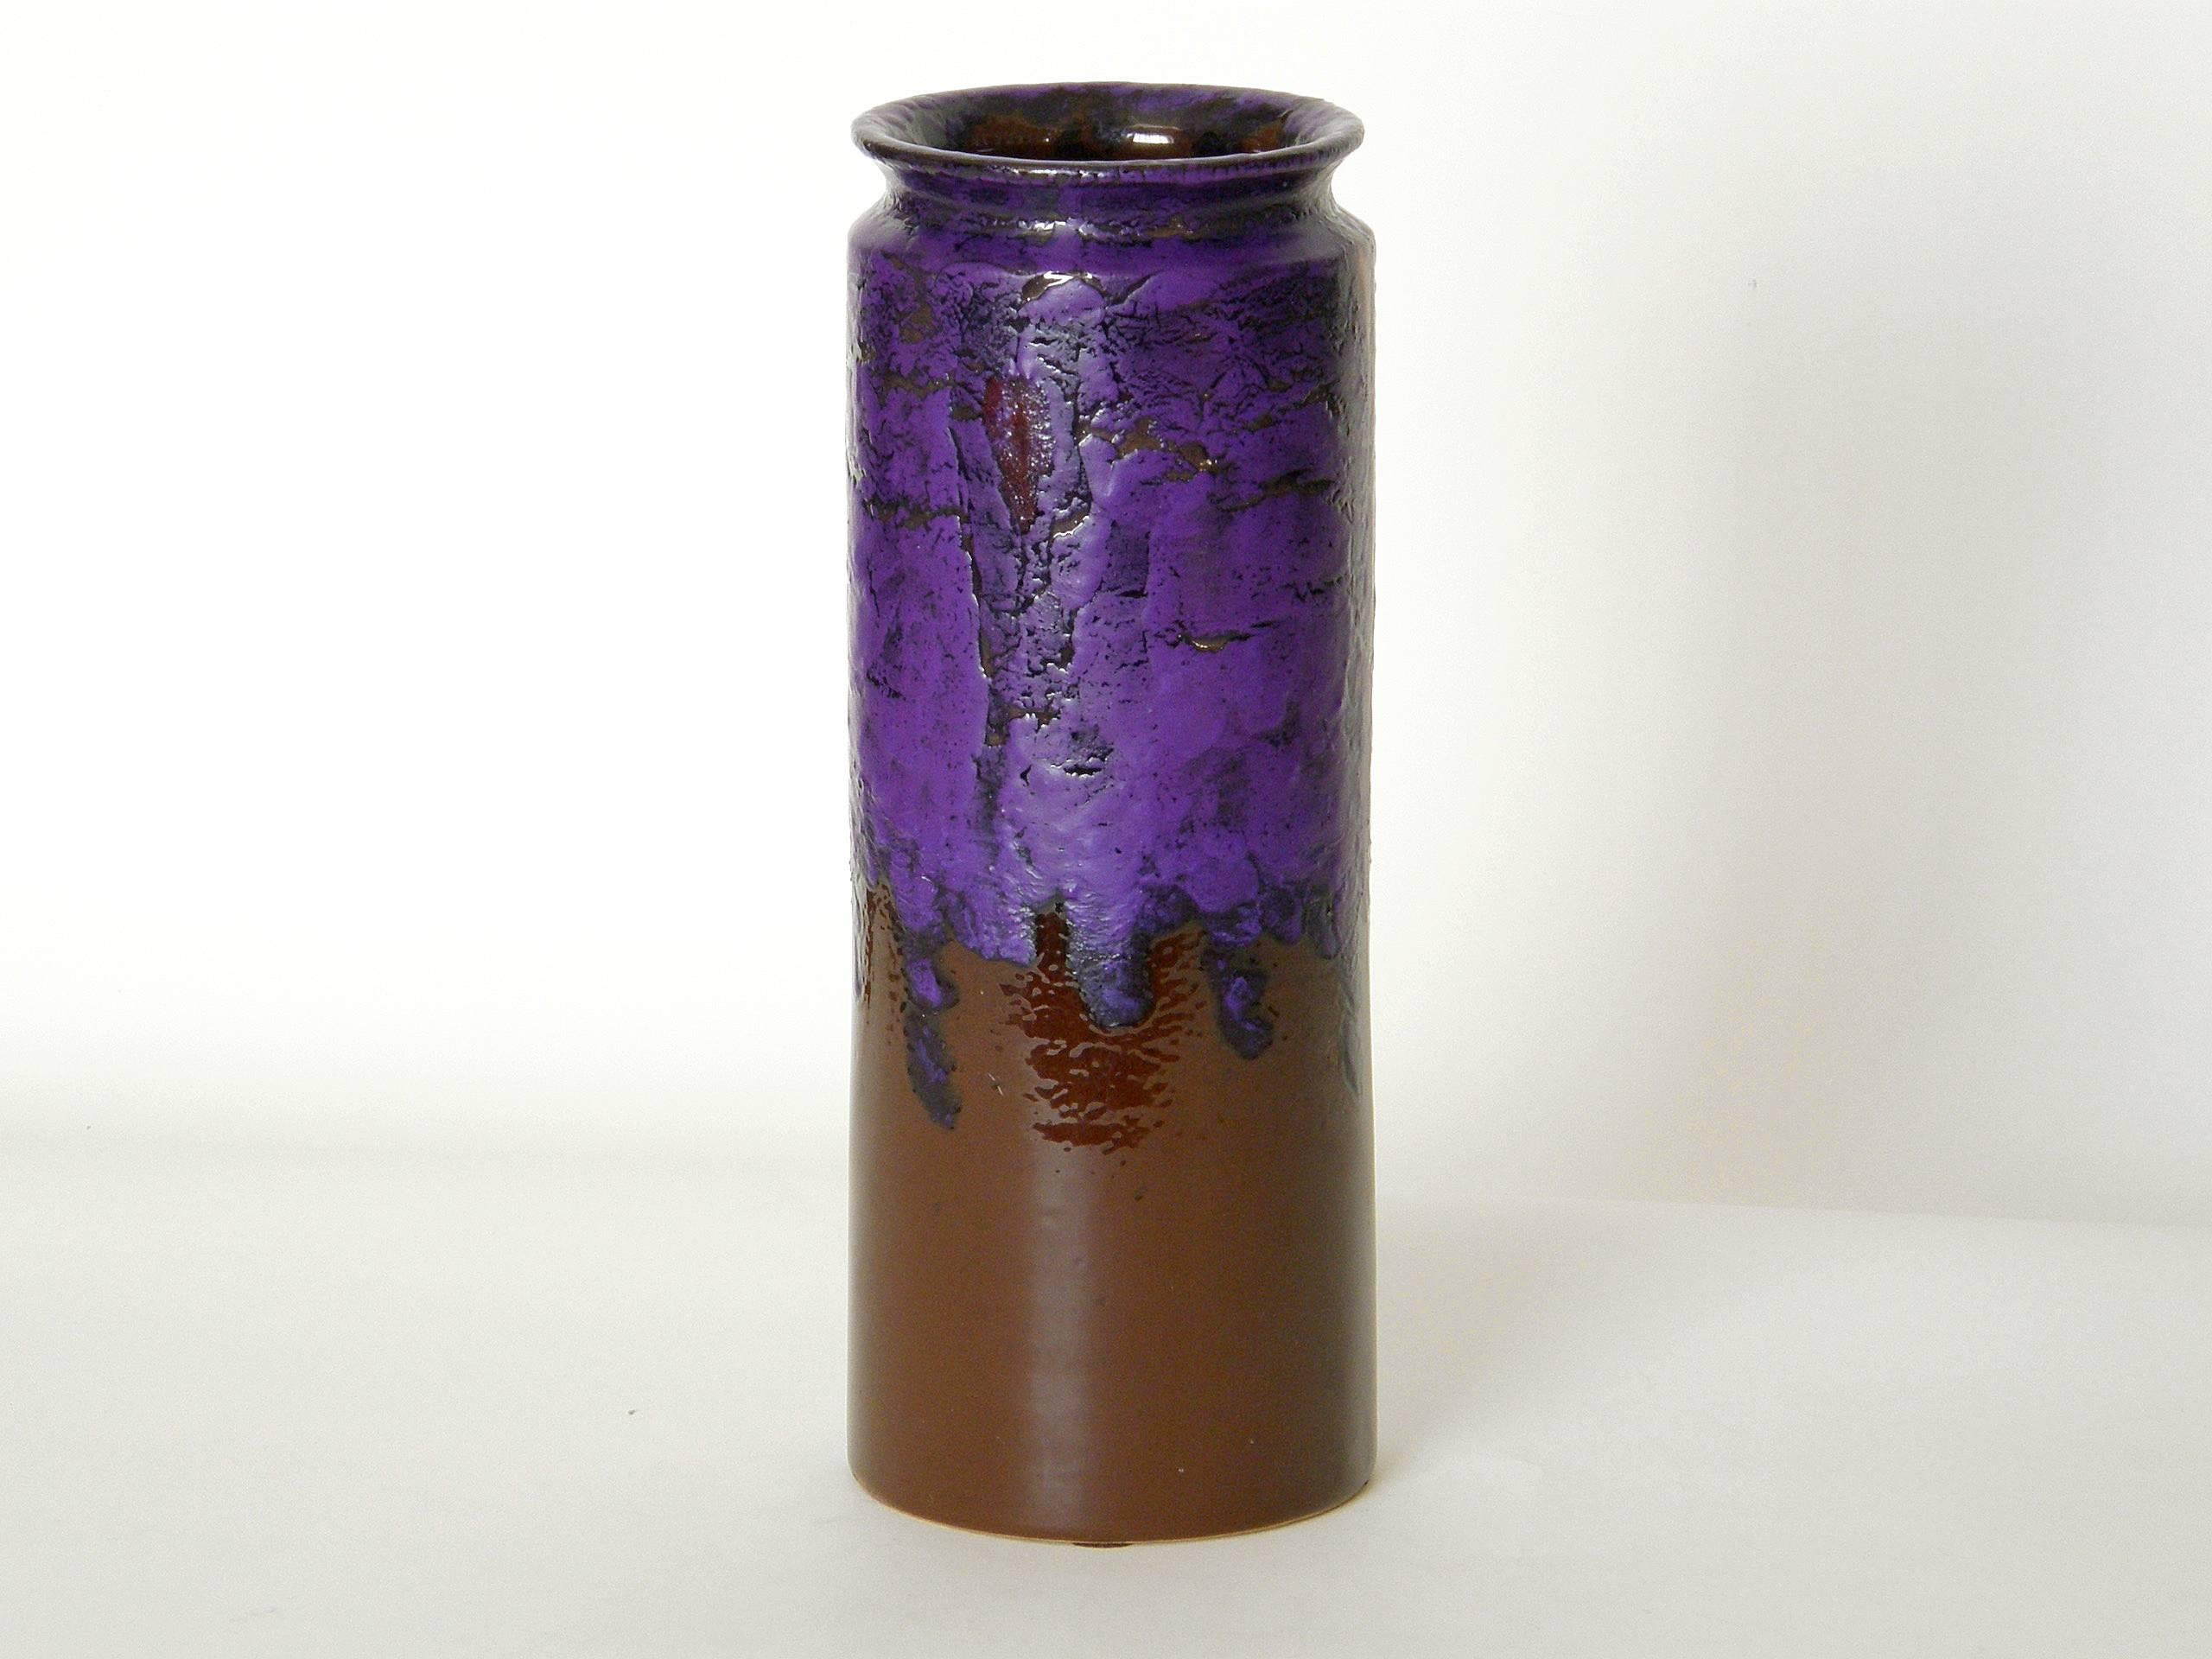 Ceramic vase made in Italy by Bitossi for Rosenthal-Netter. The vivid purple lava glaze with bright red accents flows down over the chocolate brown base color. This is a classic example of mid-century modern Italian pottery.

Please contact us if